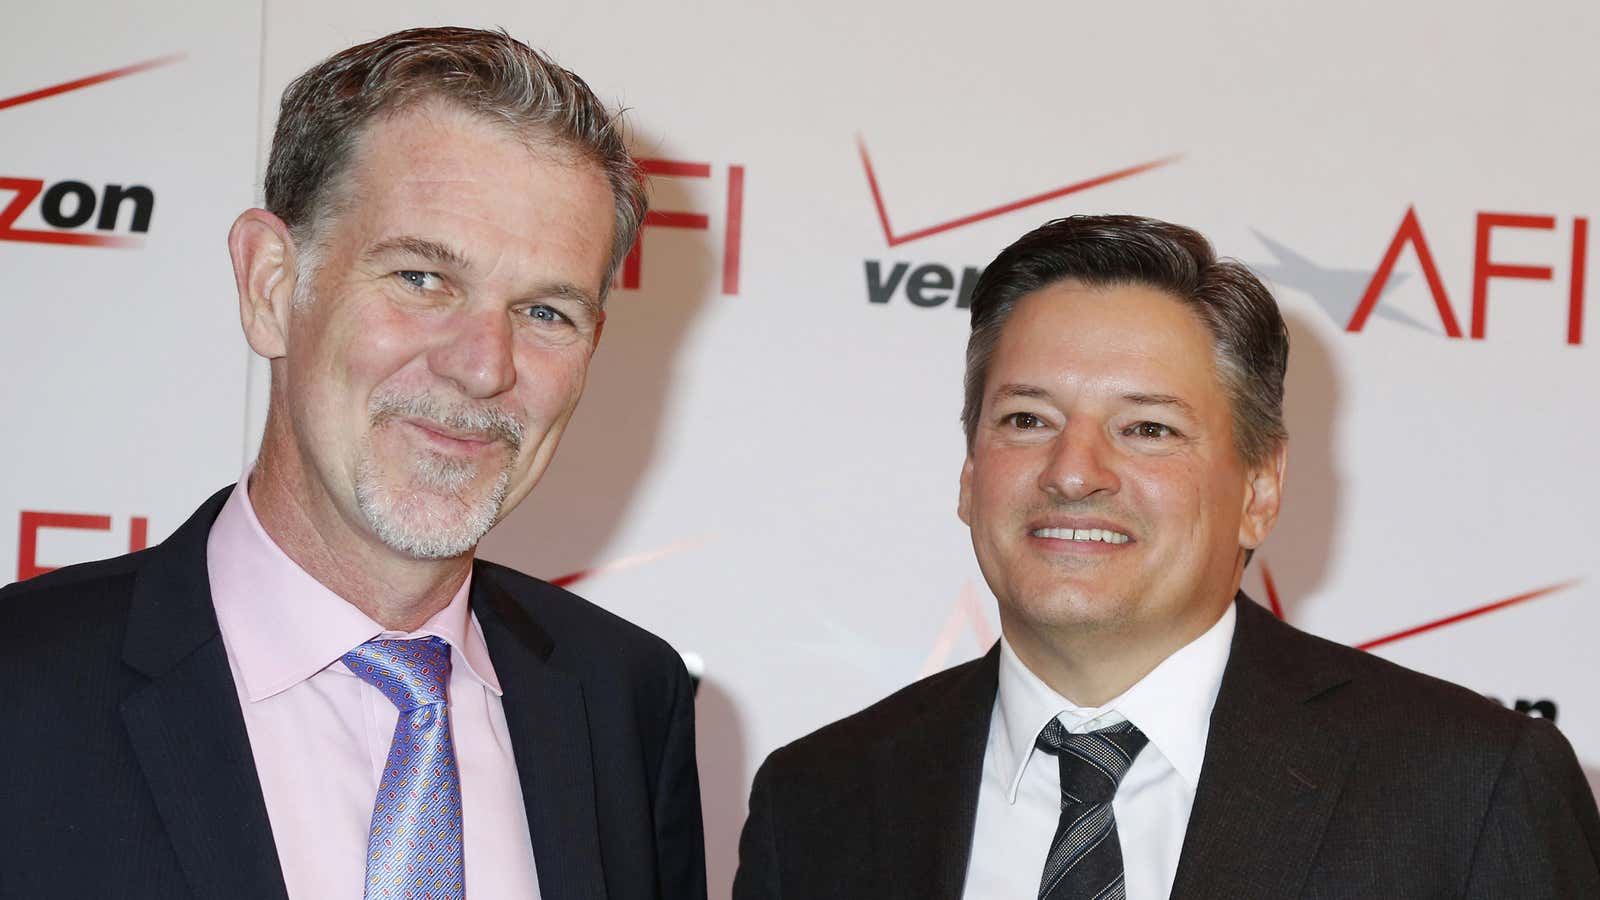 Reed Hastings and Ted Sarandos wouldn’t have opened Netflix’s content purse strings for “True Detective.”